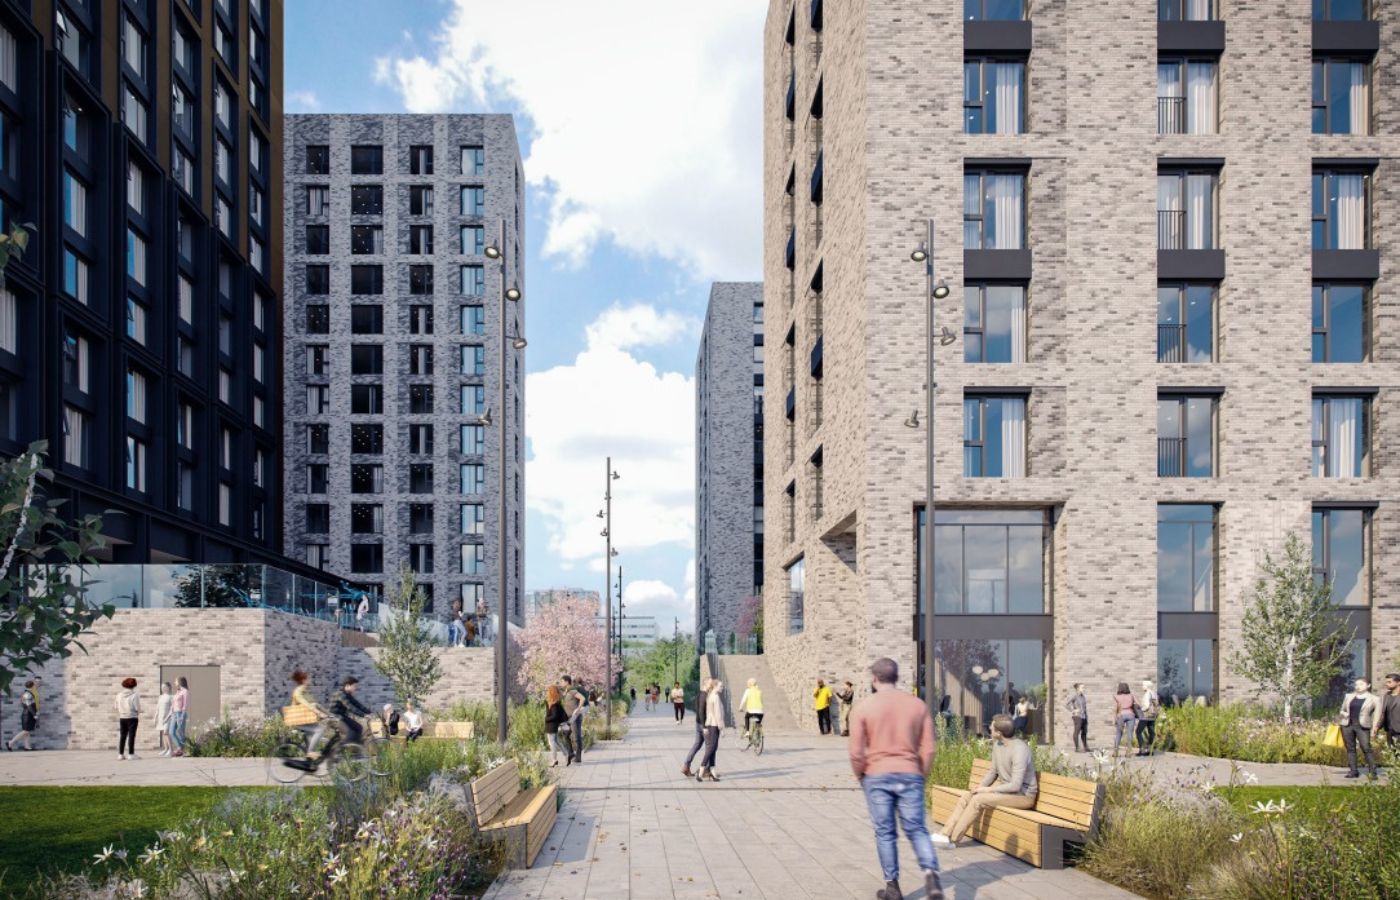 The flats would be built near the Kingston Bridge at Anderston Quay